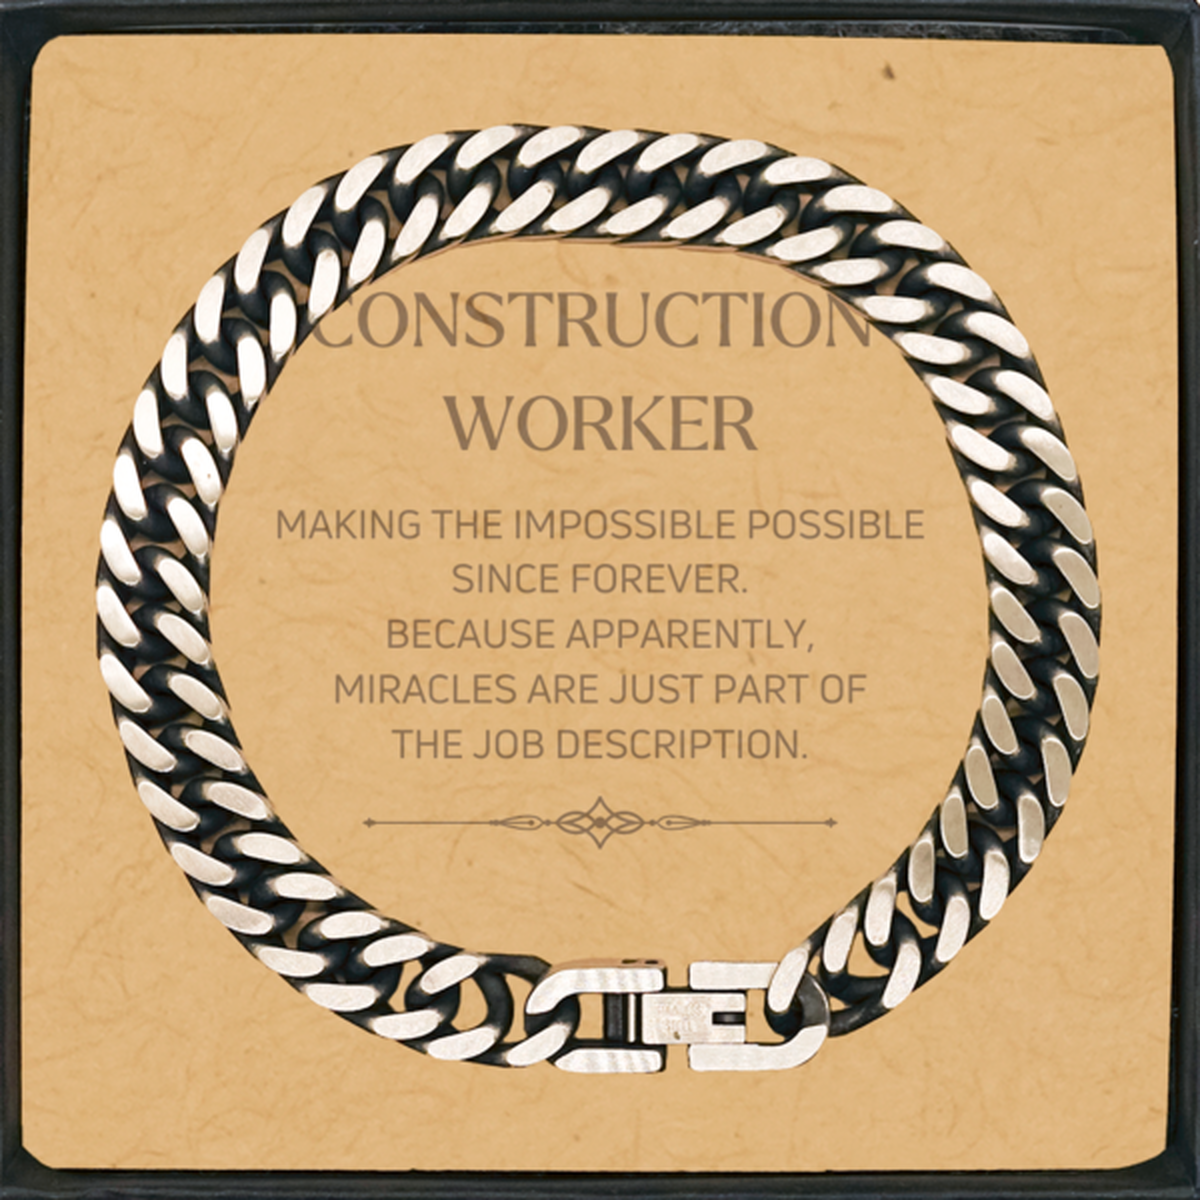 Funny Construction Worker Gifts, Miracles are just part of the job description, Inspirational Birthday Cuban Link Chain Bracelet For Construction Worker, Men, Women, Coworkers, Friends, Boss